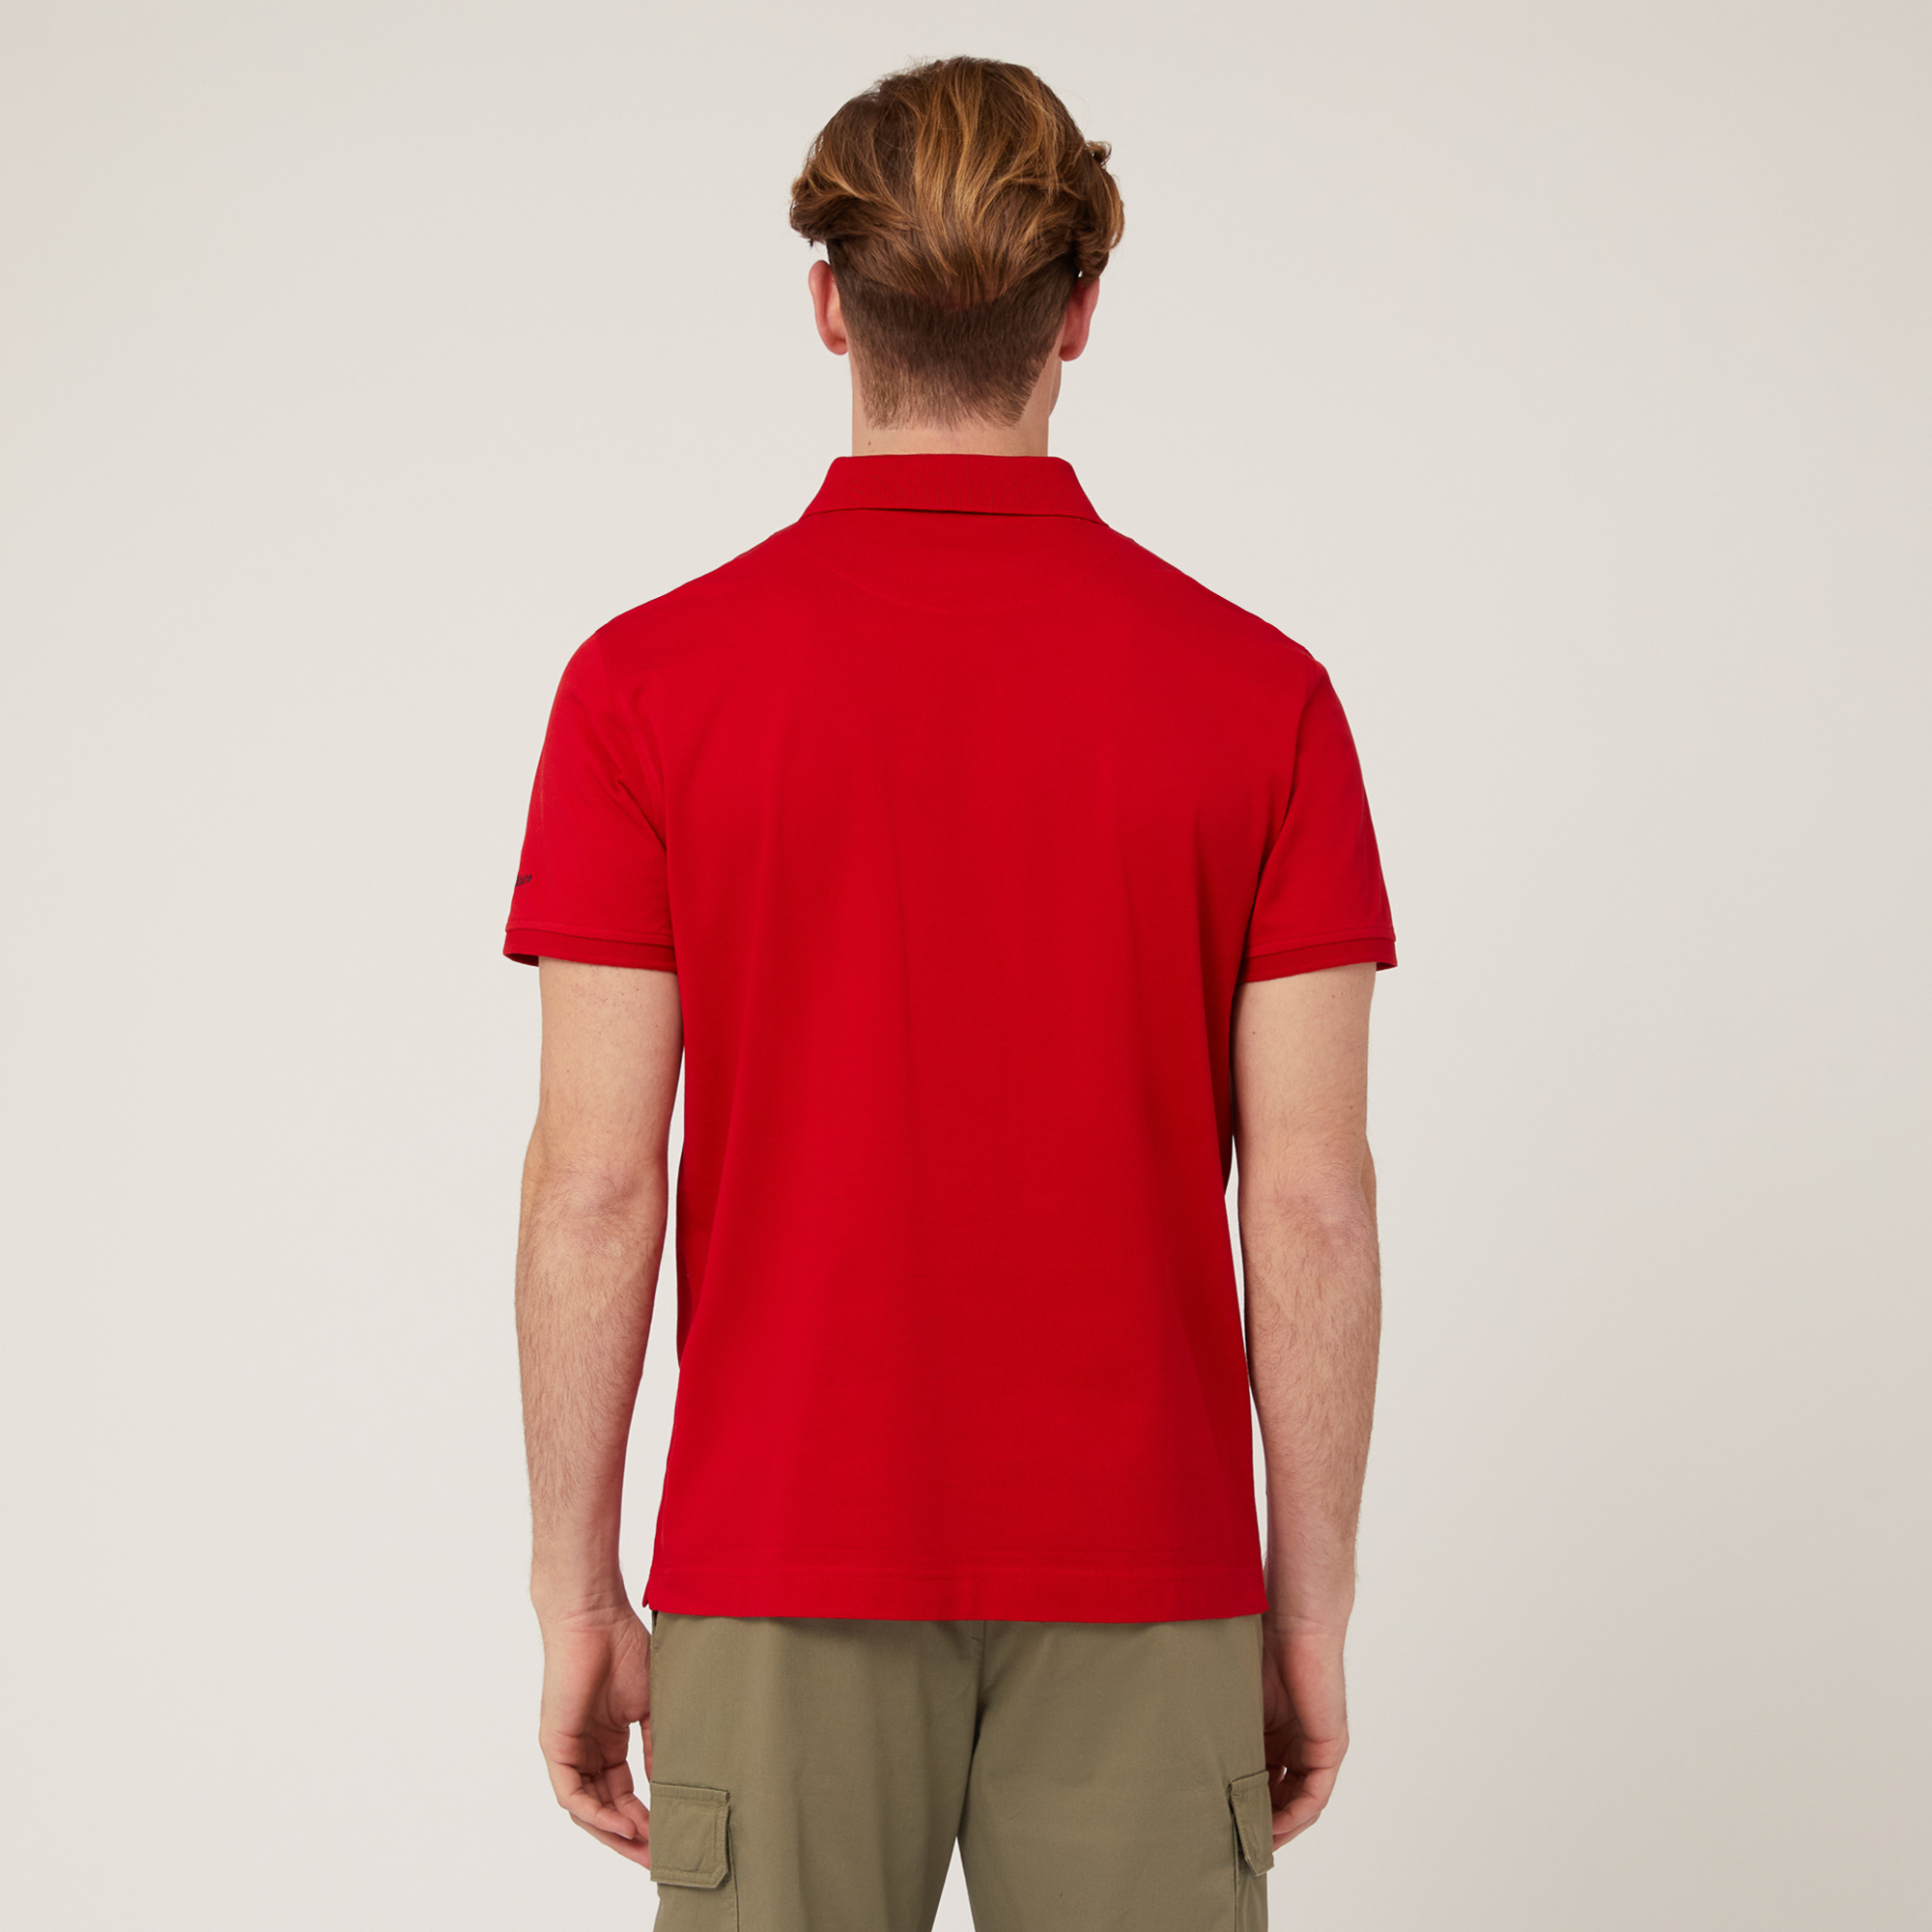 Poloshirt mit Lettering und Logo, Rot, large image number 1